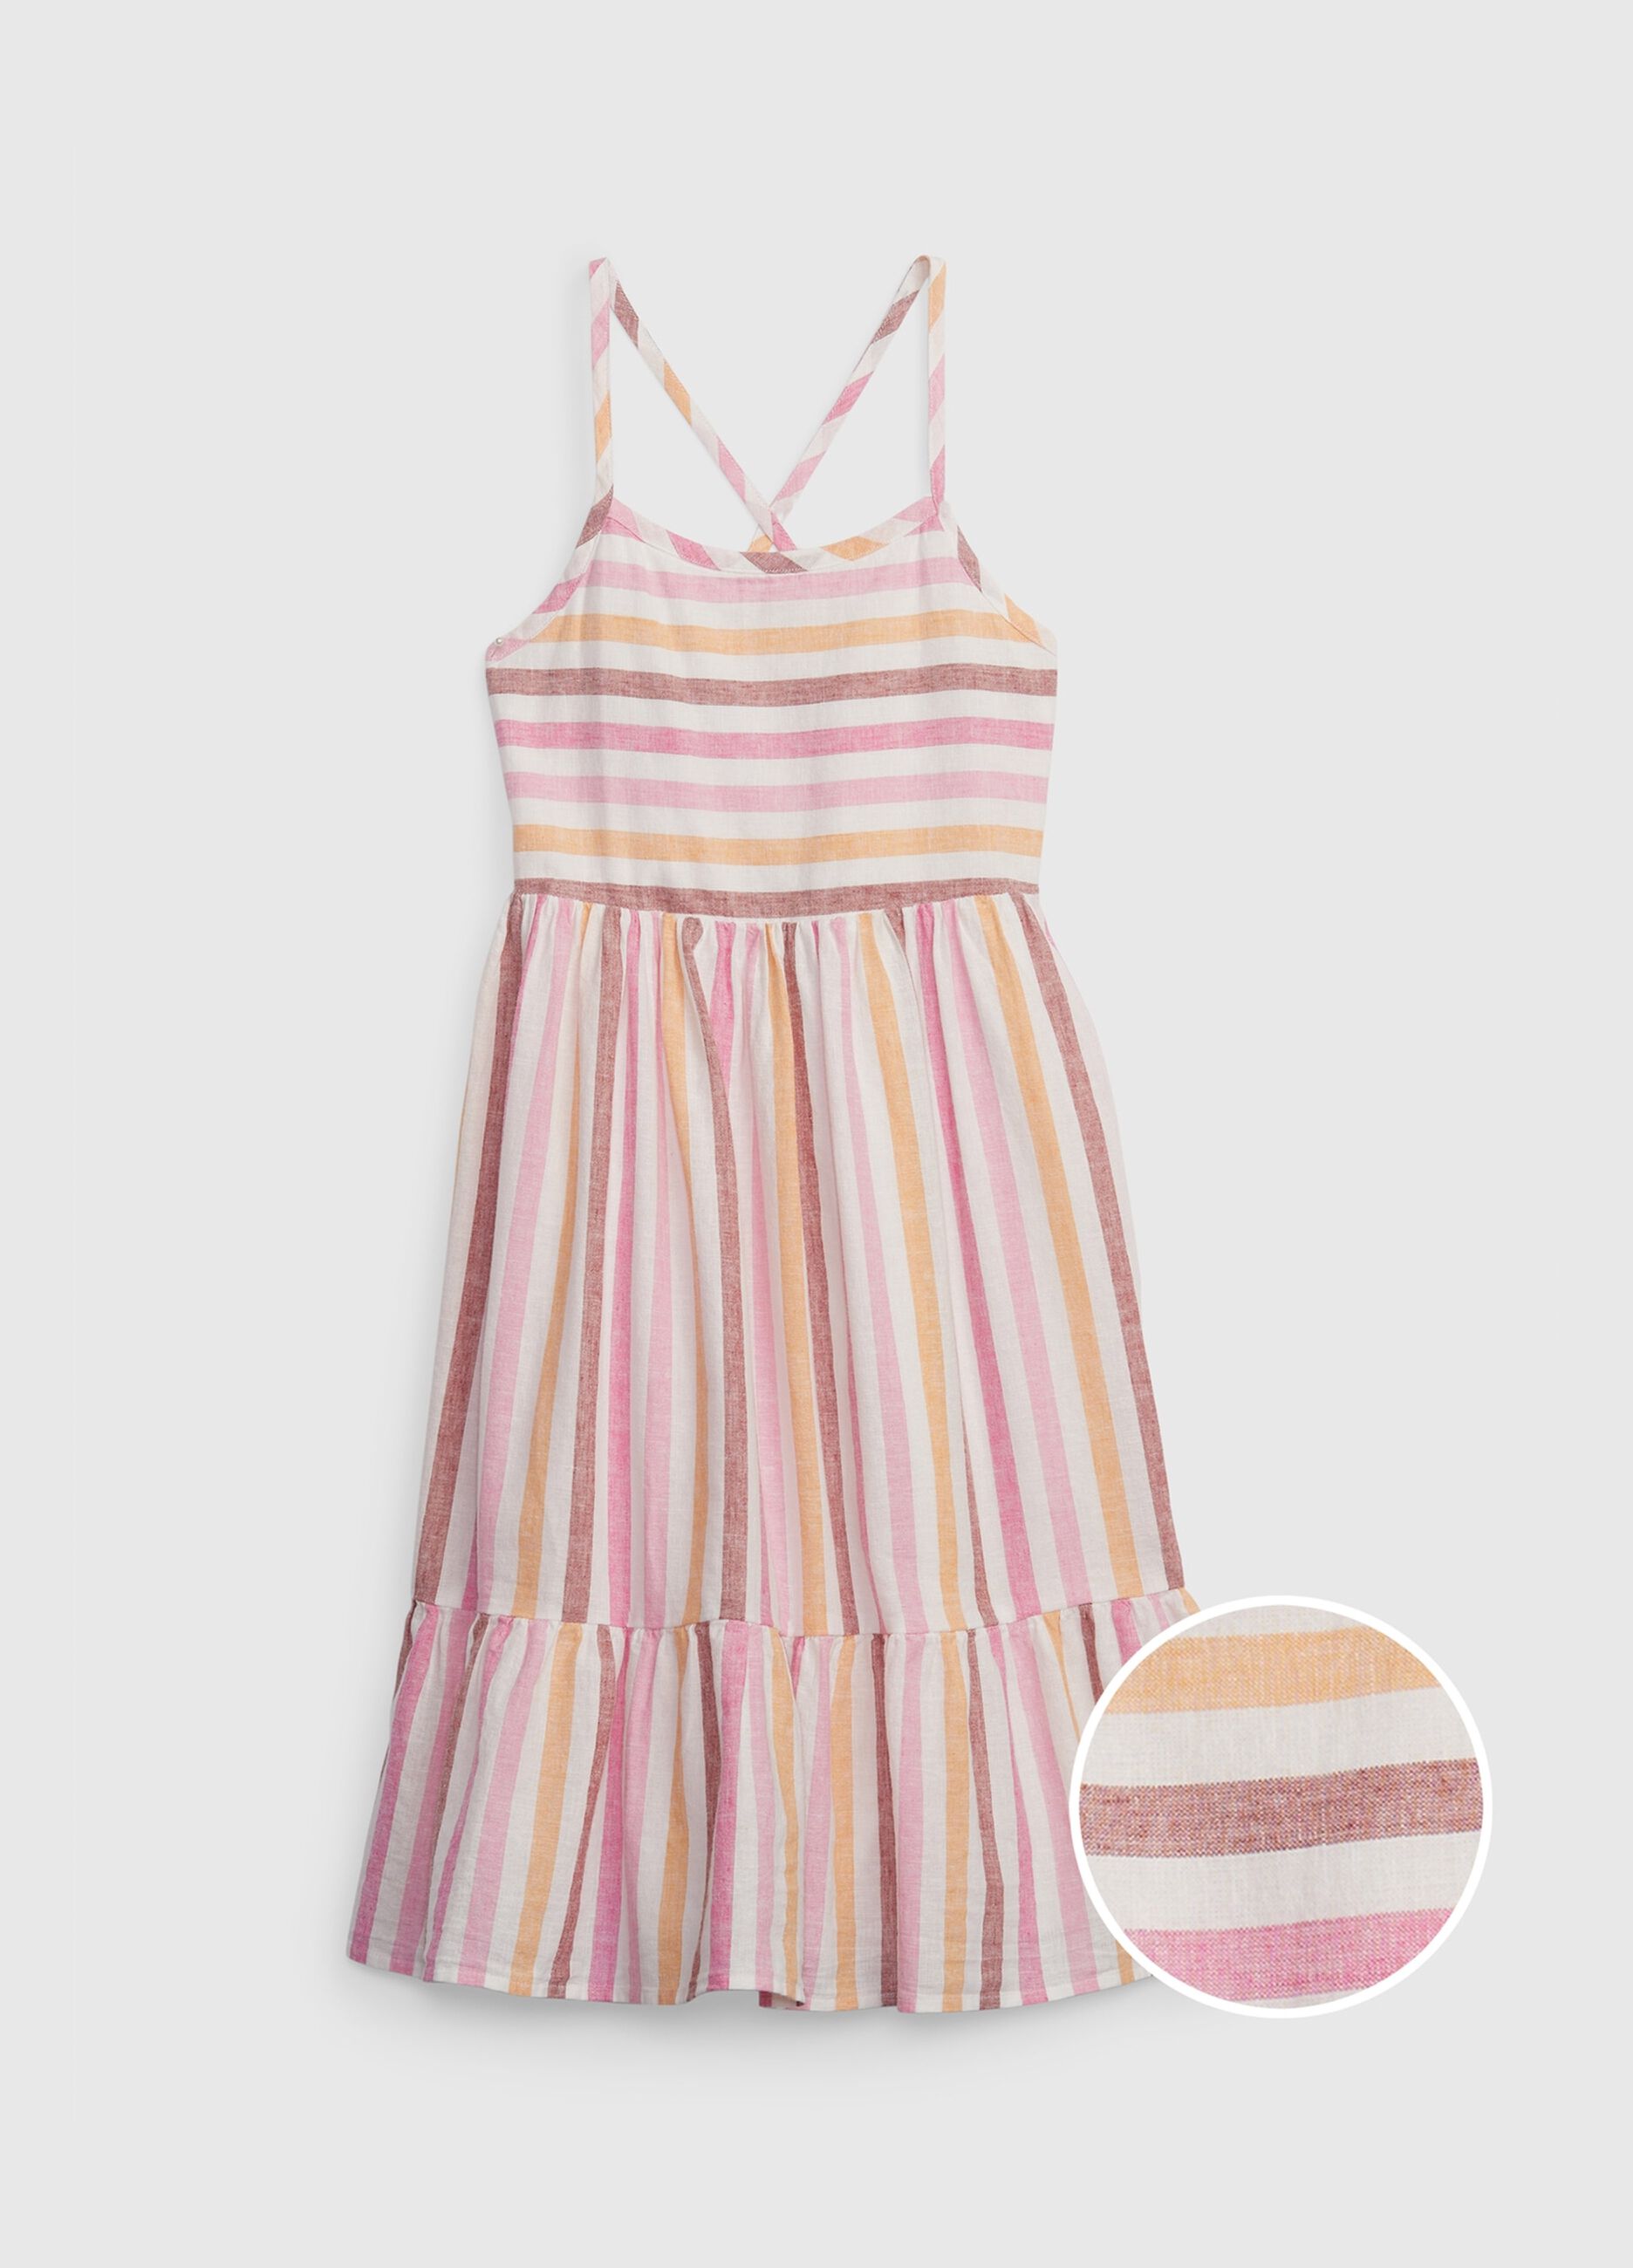 Cotton dress with crossover shoulder straps and flounce